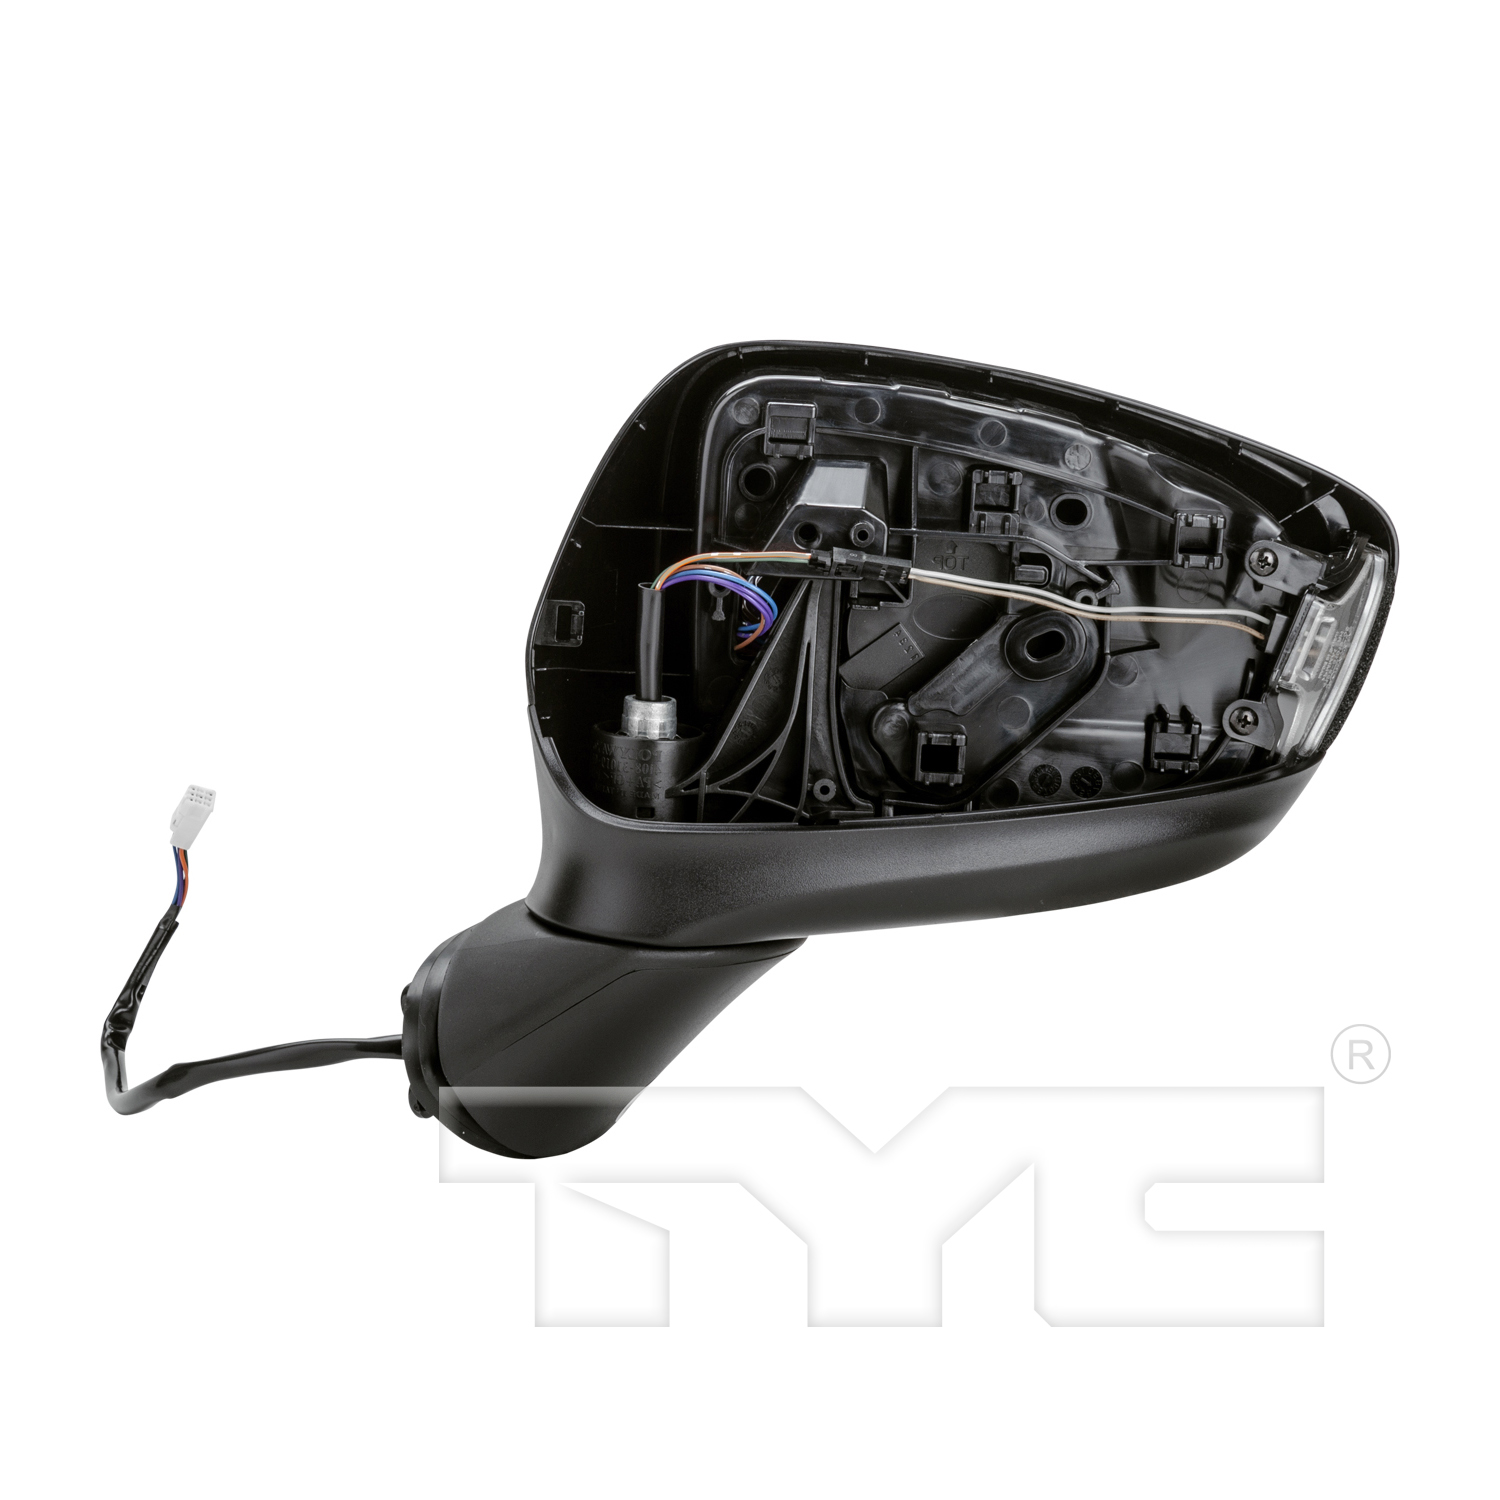 Aftermarket MIRRORS for MAZDA - CX-5, CX-5,13-15,LT Mirror outside rear view